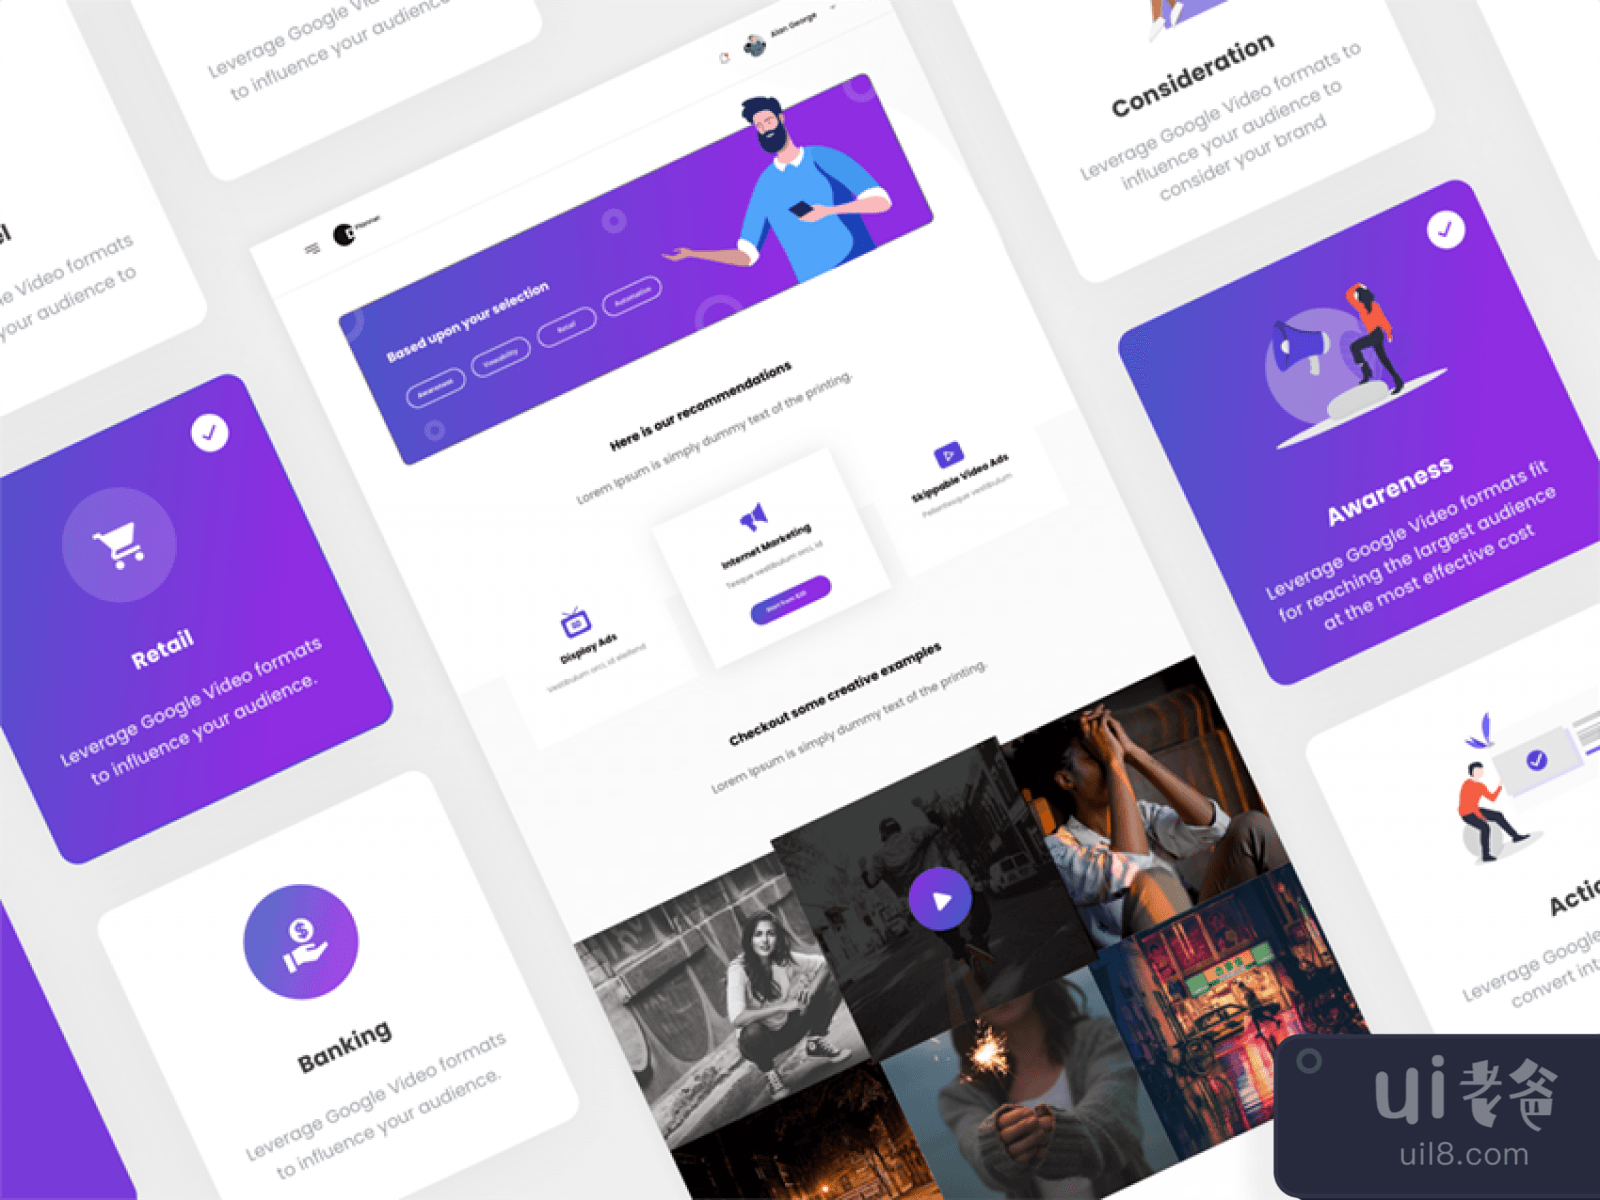 Boxed Design UI Kit for Figma and Adobe XD No 1